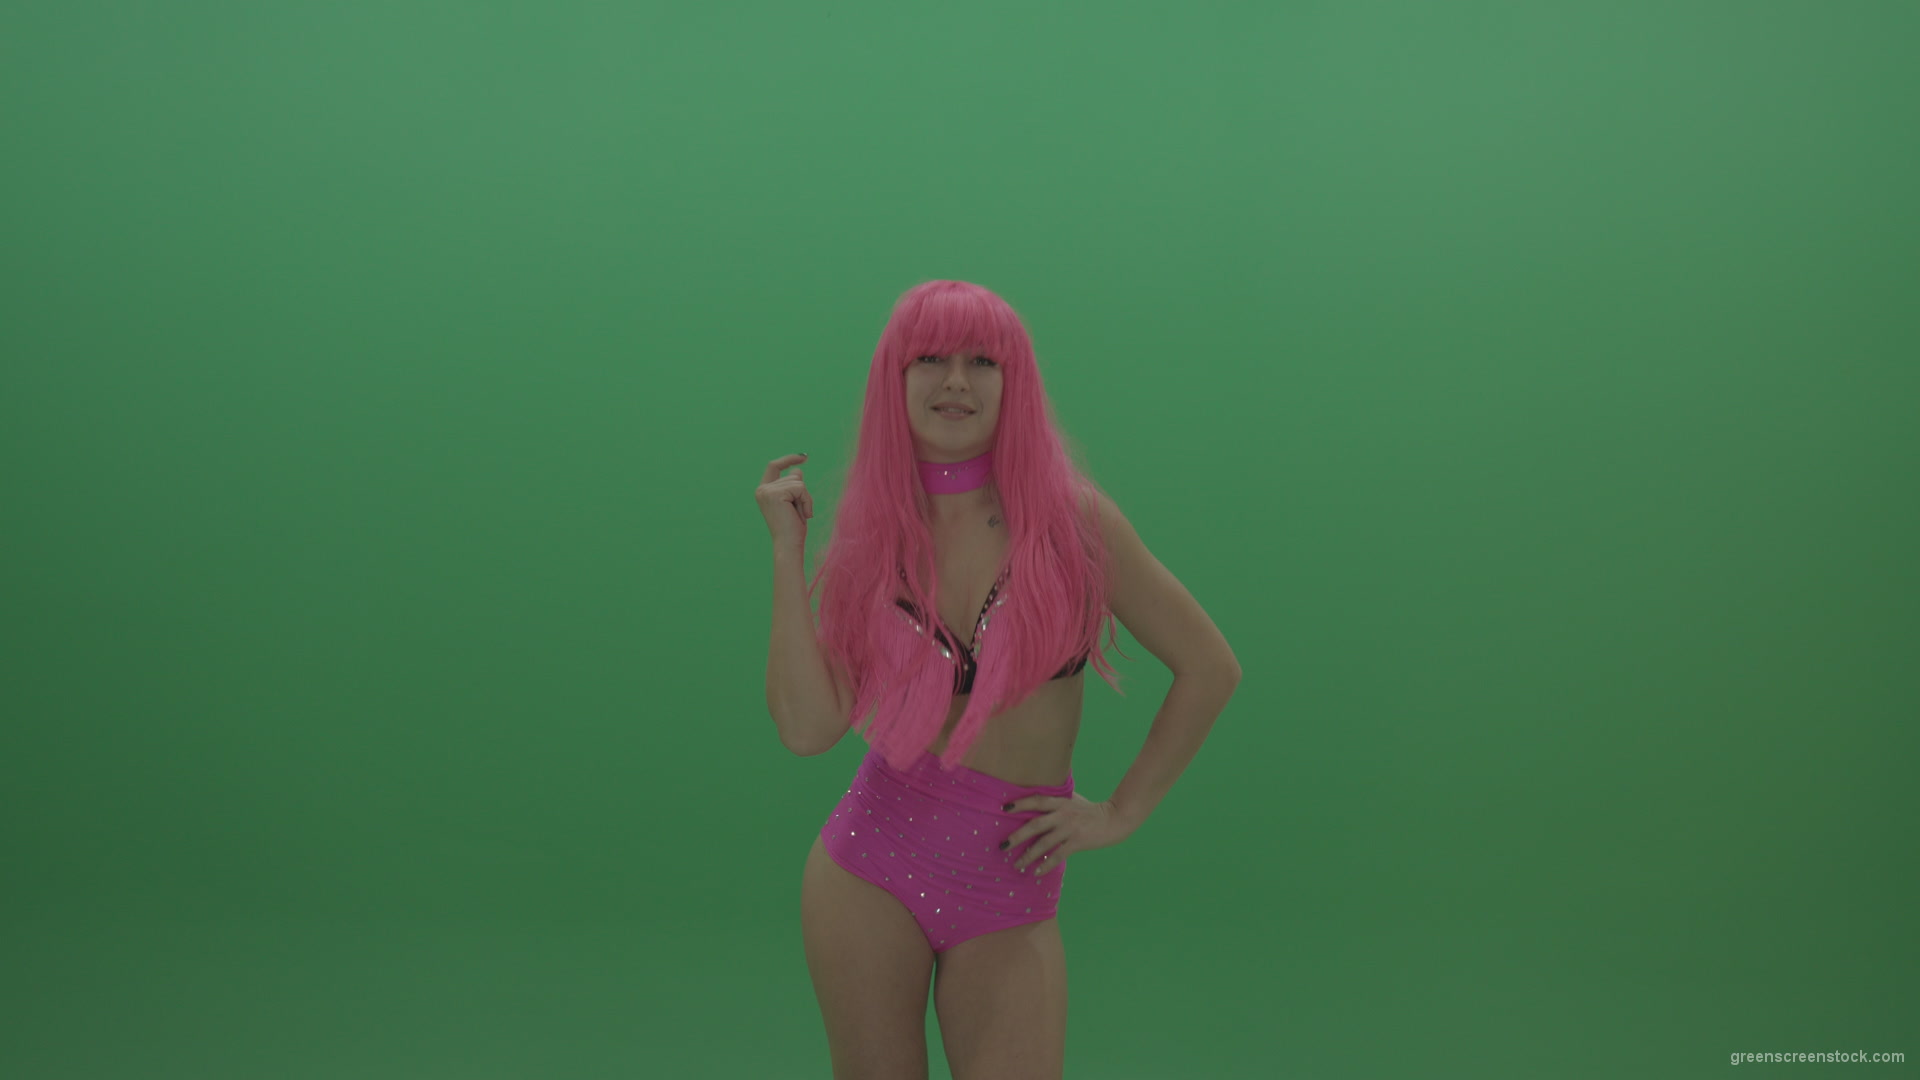 Gogo-dancer-in-pink-displays-an-amazing-pose-over-chromakey-background_009 Green Screen Stock